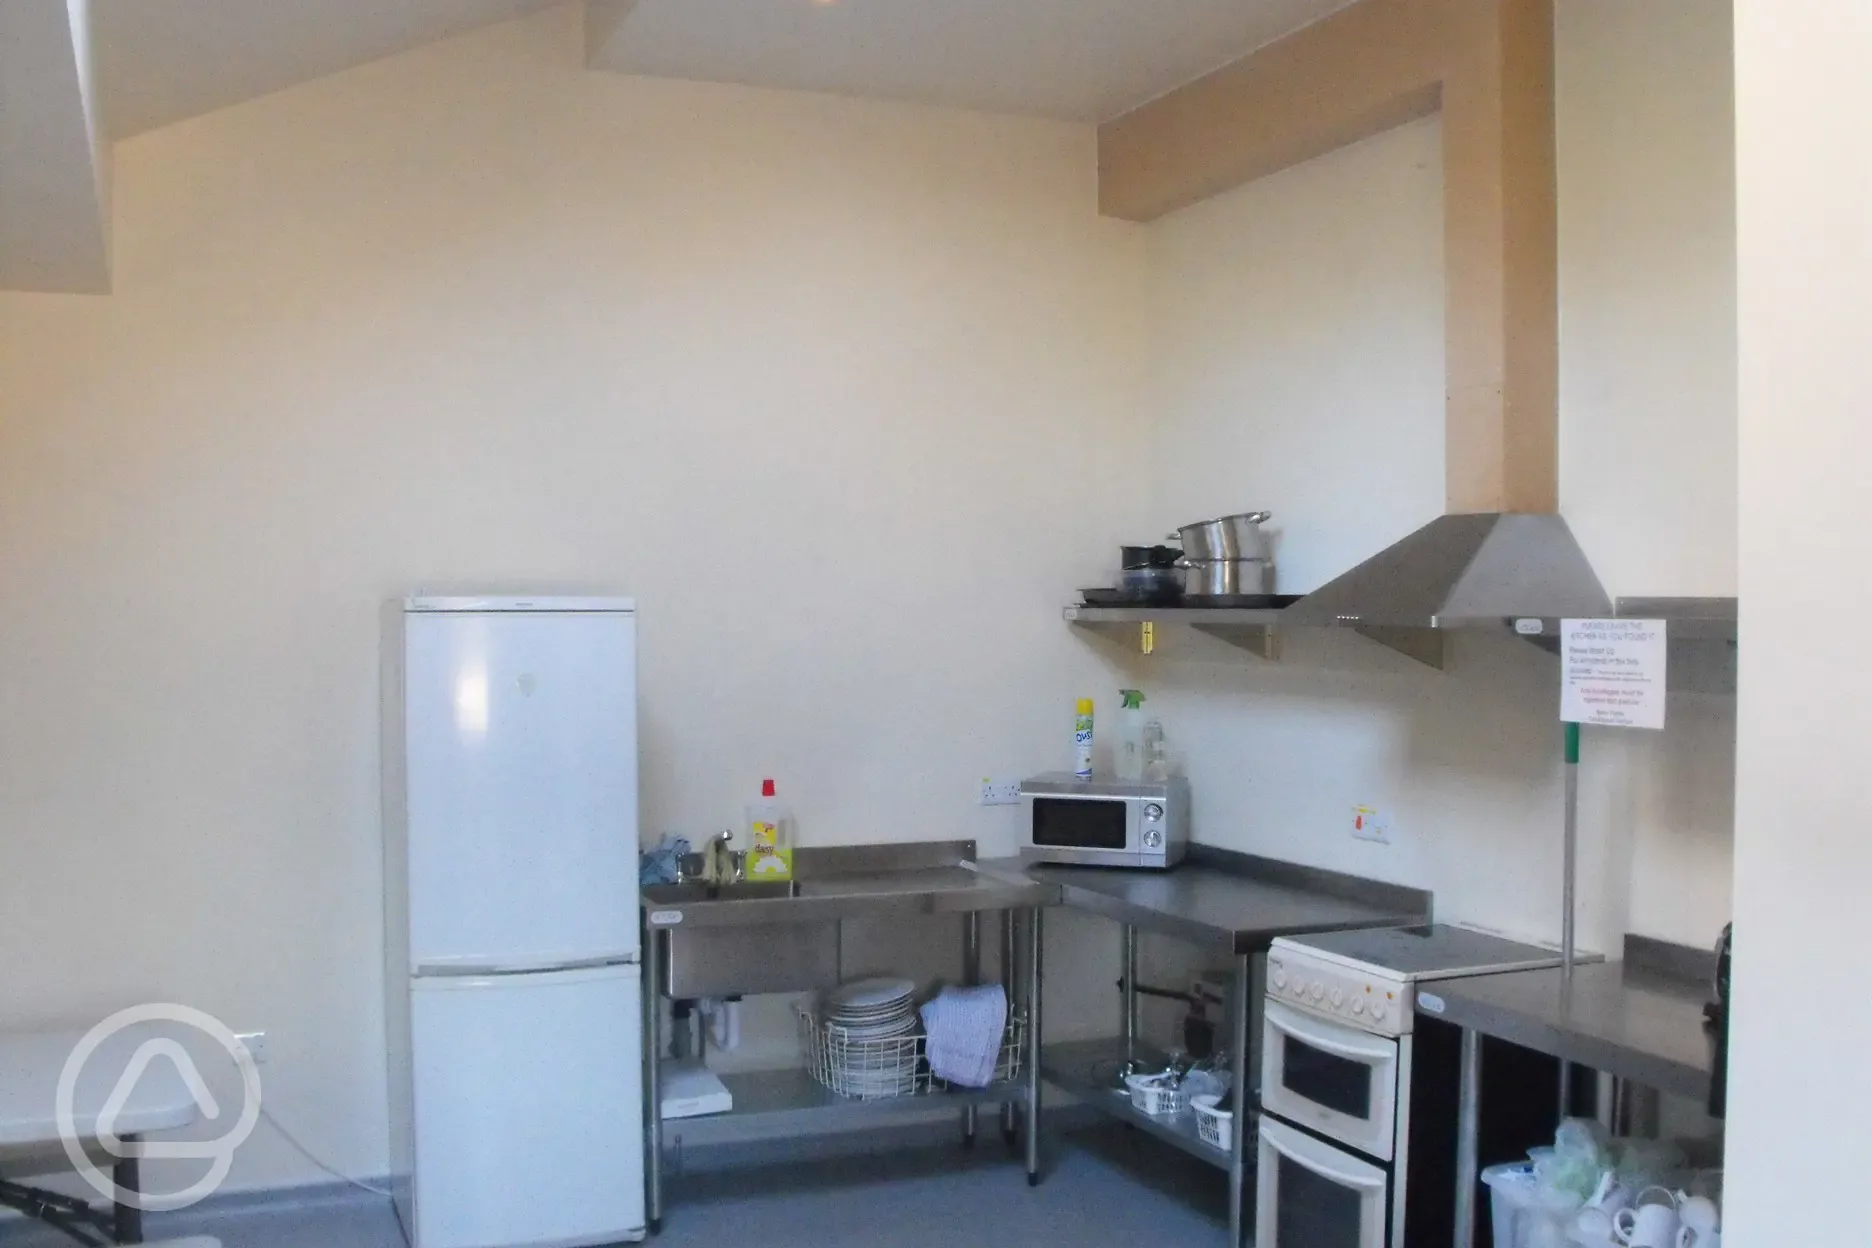 The kitchen has got 2 cookers, fridgefreezer, microwave, toaster, 2 kettles and a microwave. Crockery and cutlery and pots and pans. There are 3 large wooden tables with bench seating.